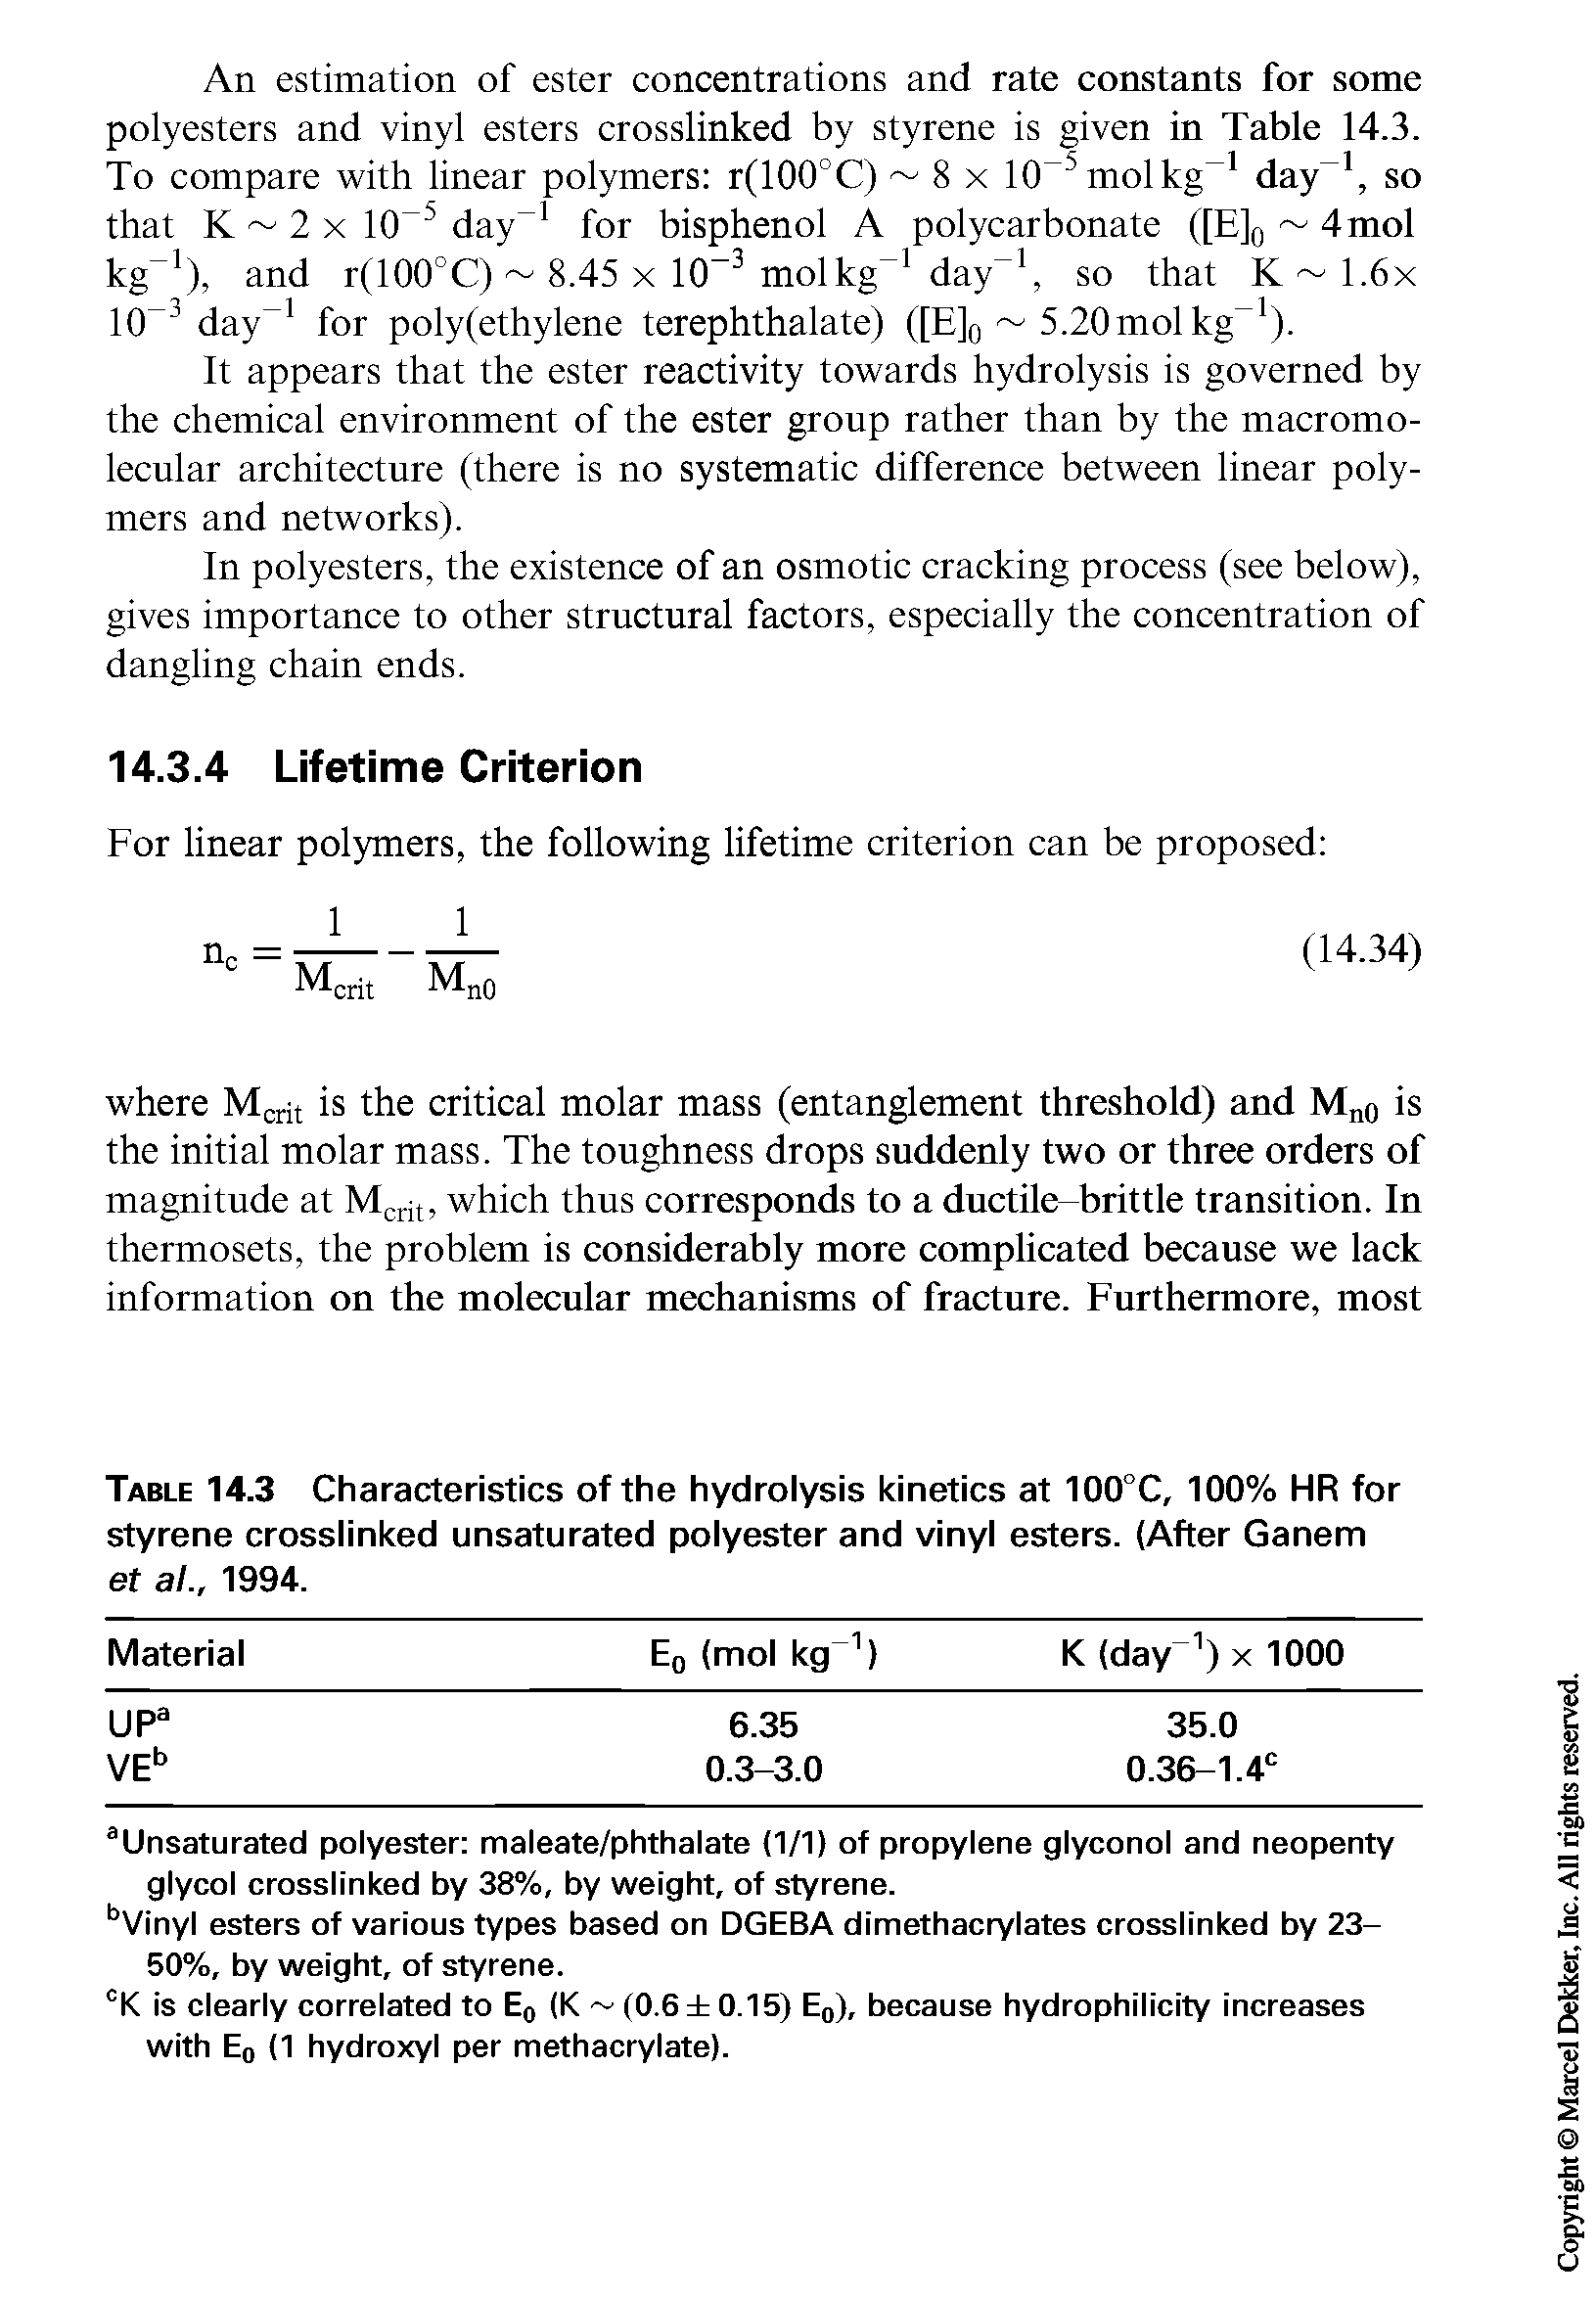 Table 14.3 Characteristics of the hydrolysis kinetics at 100°C, 100% HR for styrene crosslinked unsaturated polyester and vinyl esters. (After Ganem et a ., 1994.